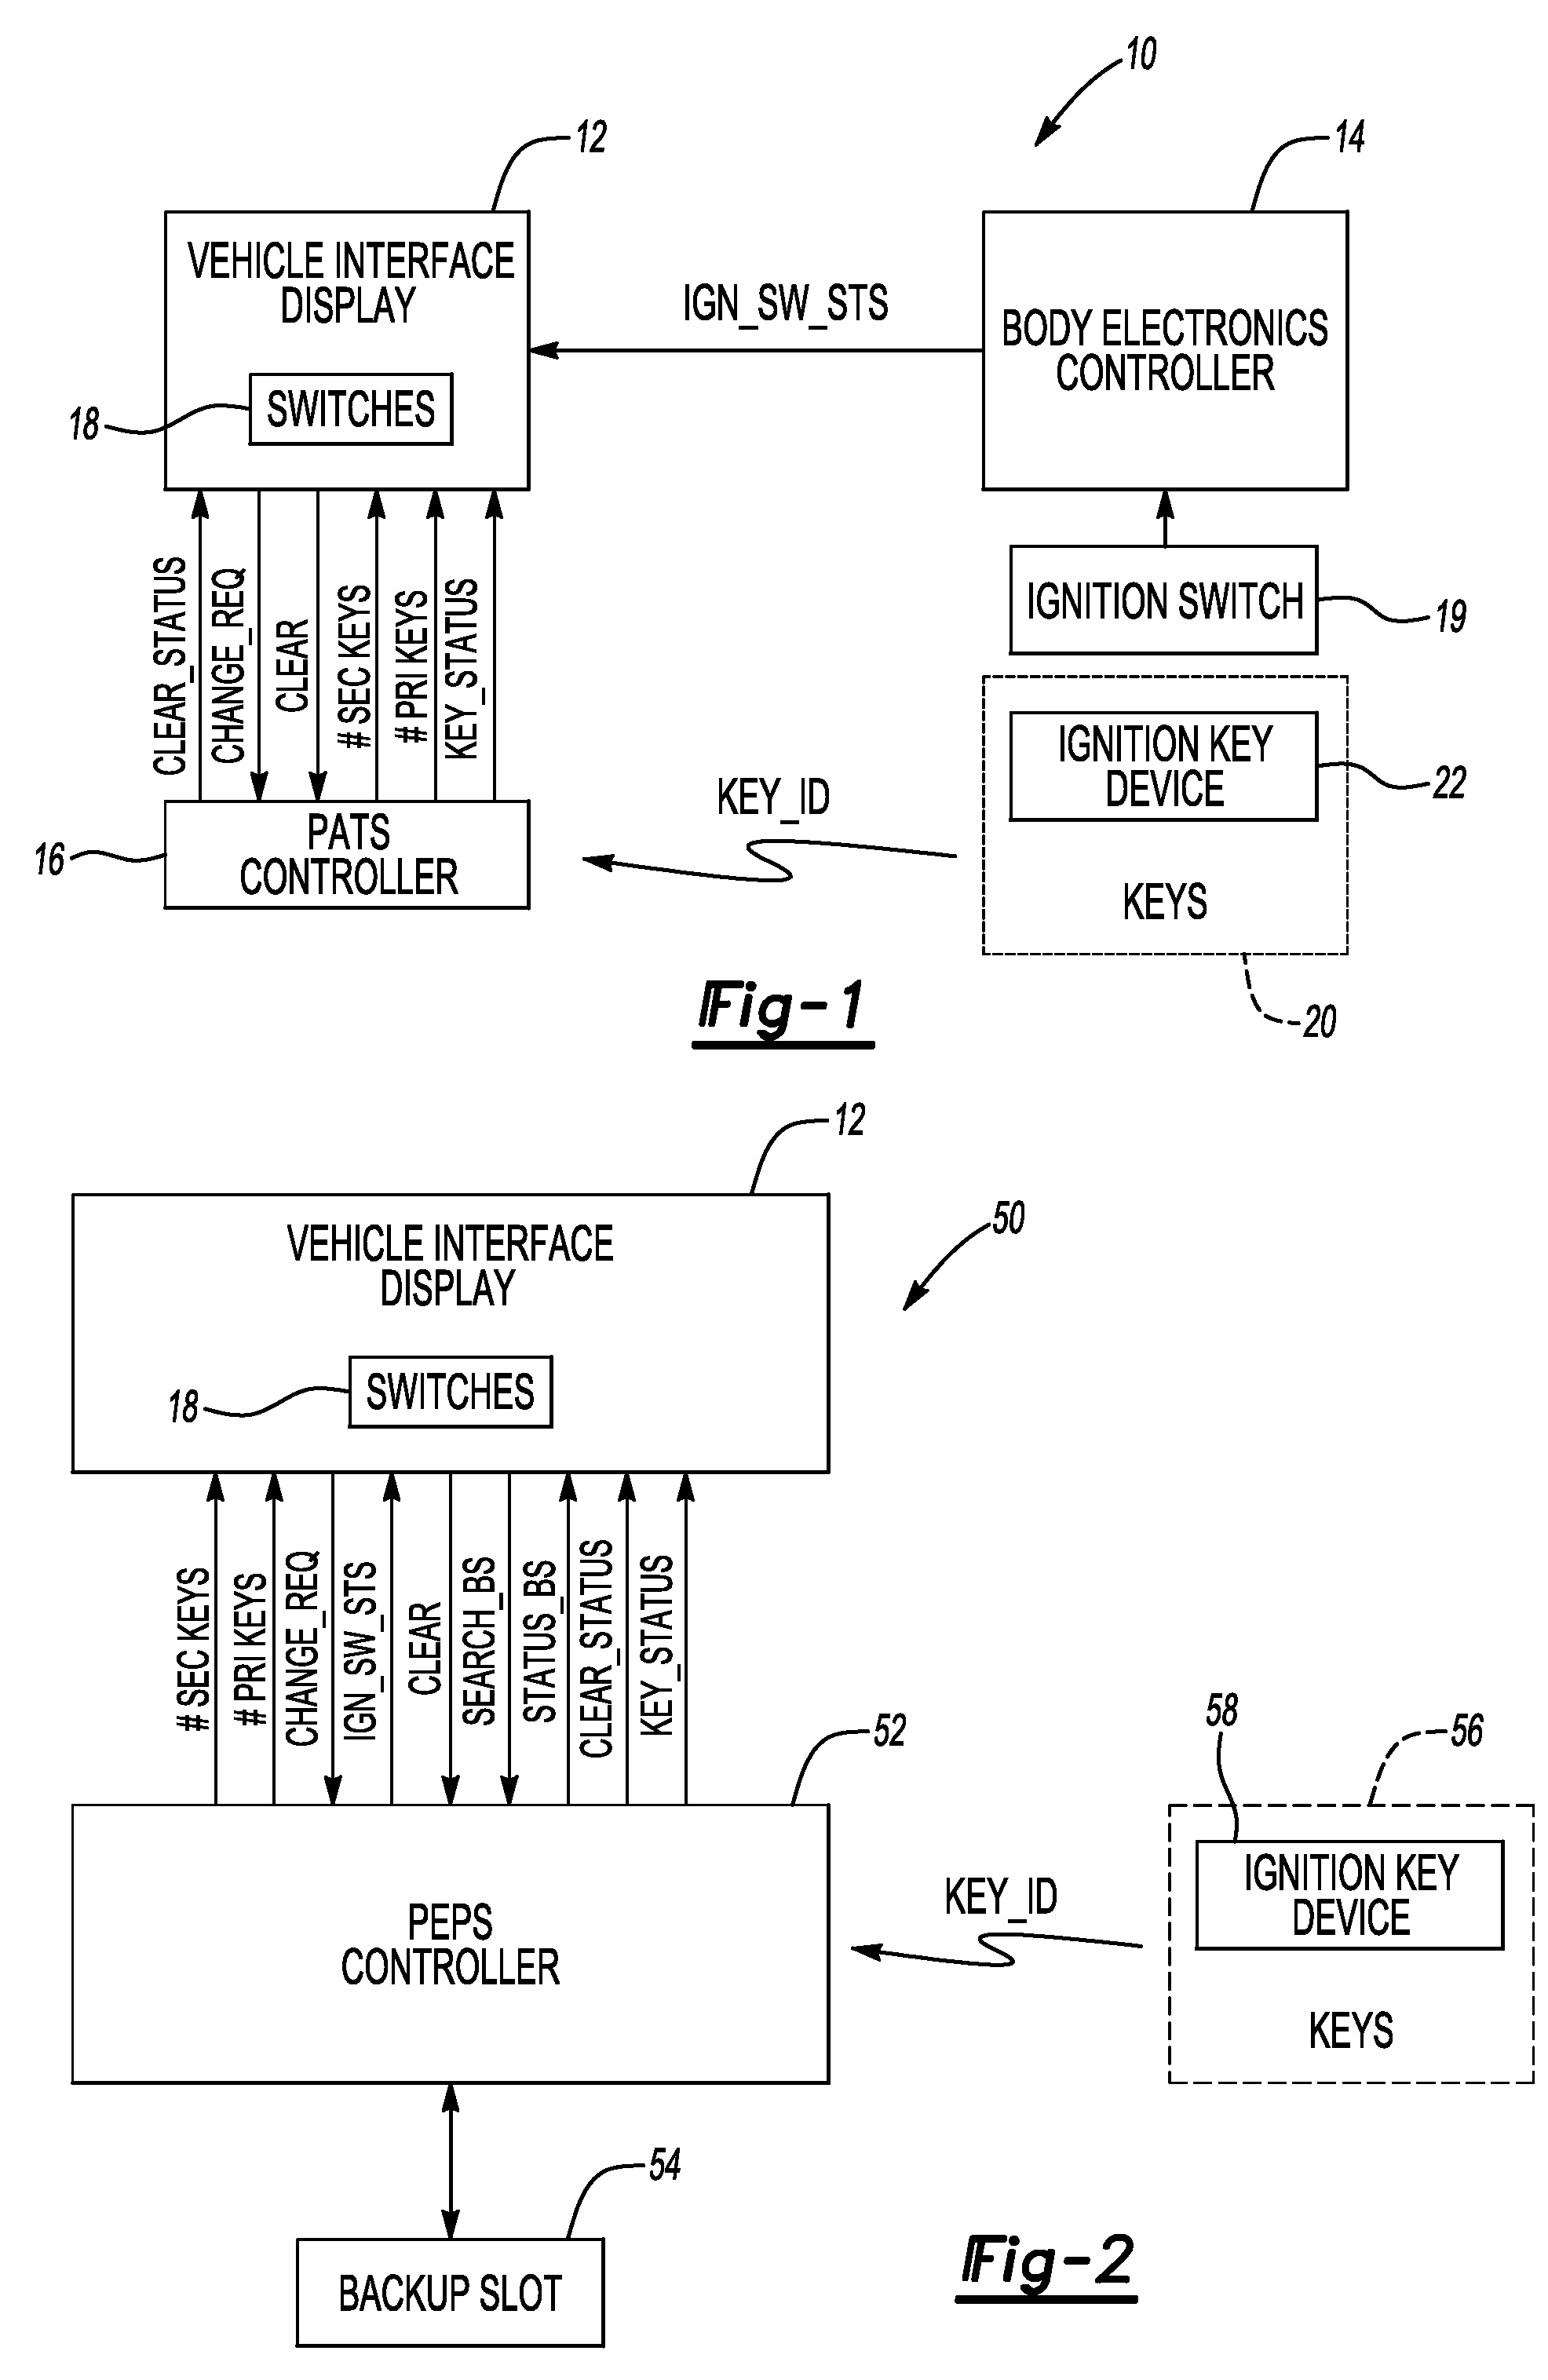 System and method for programming keys to vehicle to establish primary and secondary drivers